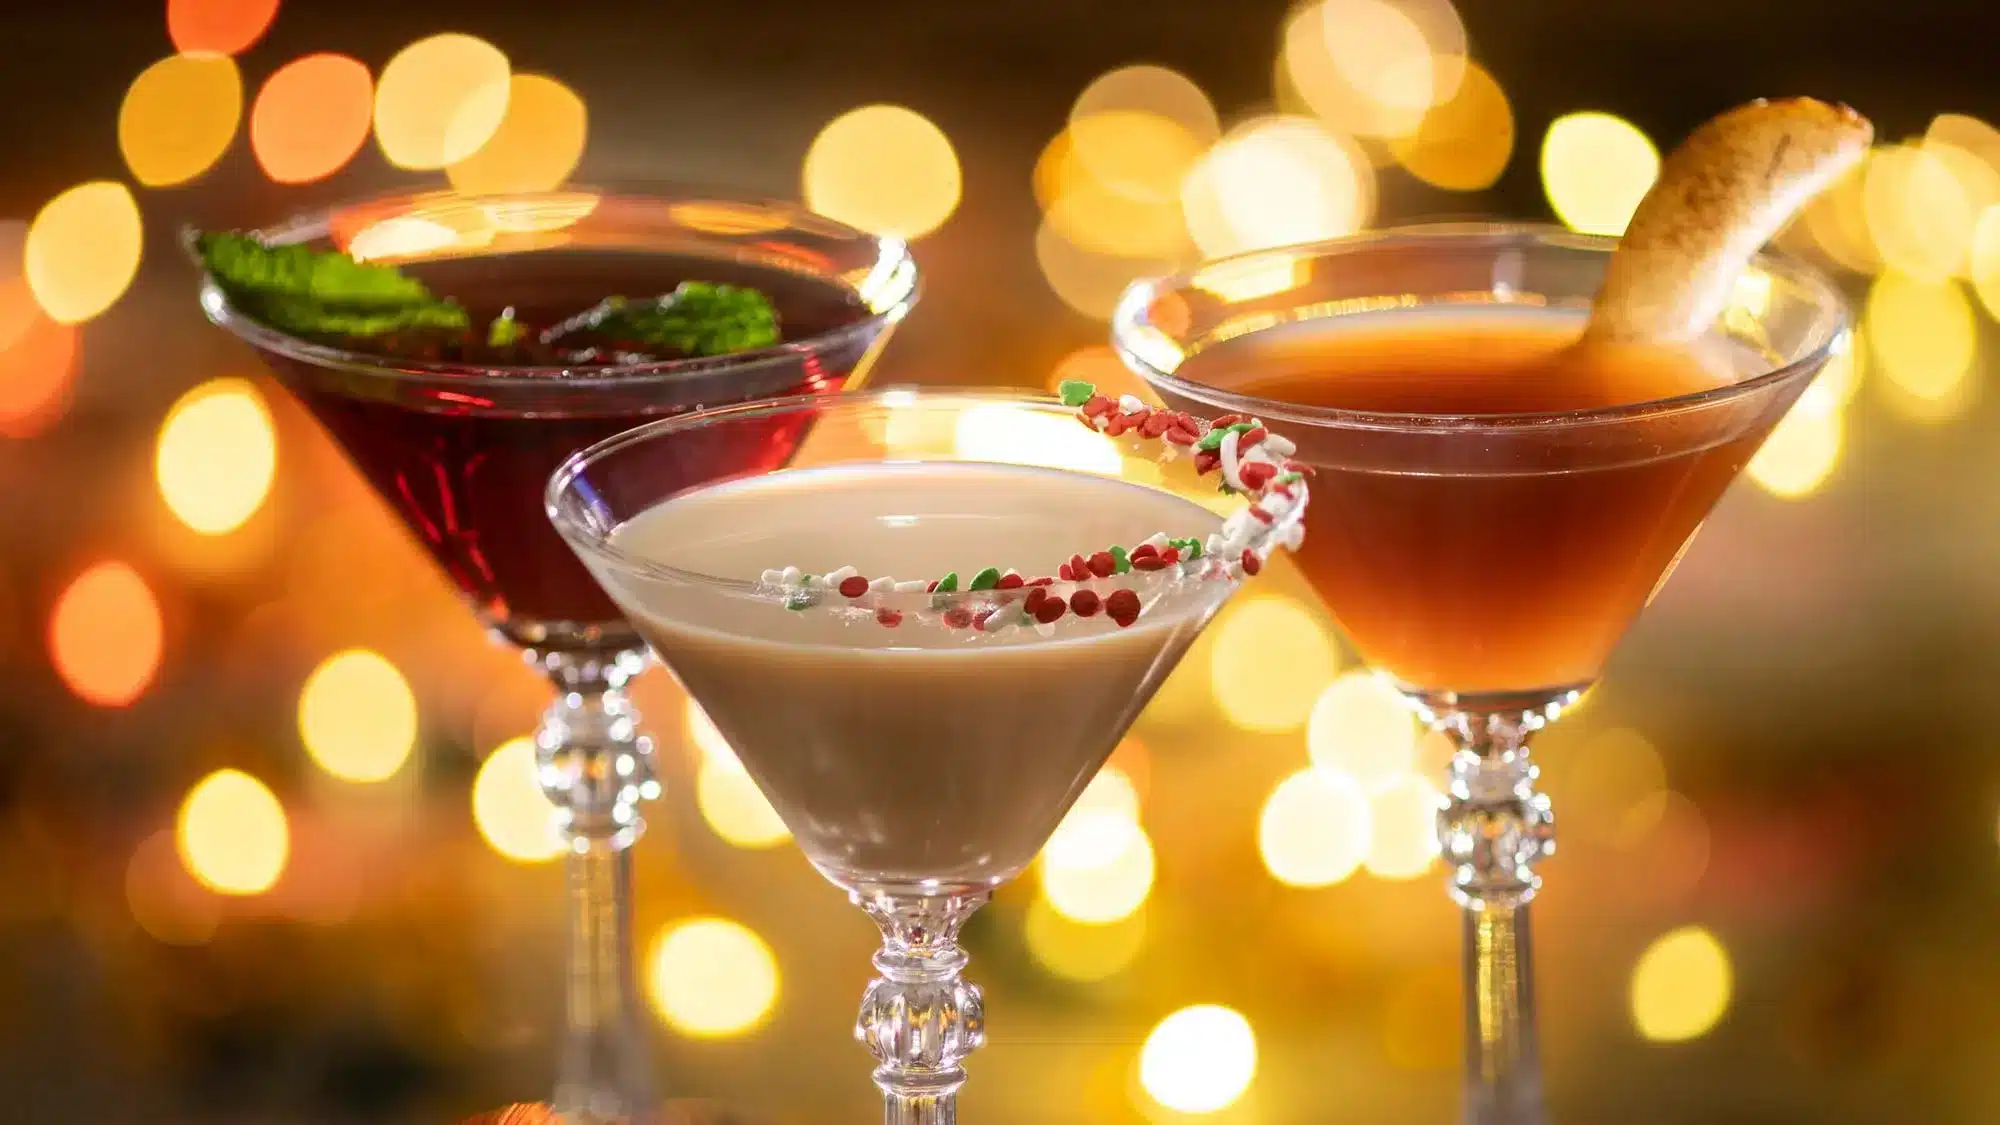 Classic Holiday Cocktails - Disney Jollywood Nights at Hollywood Studios